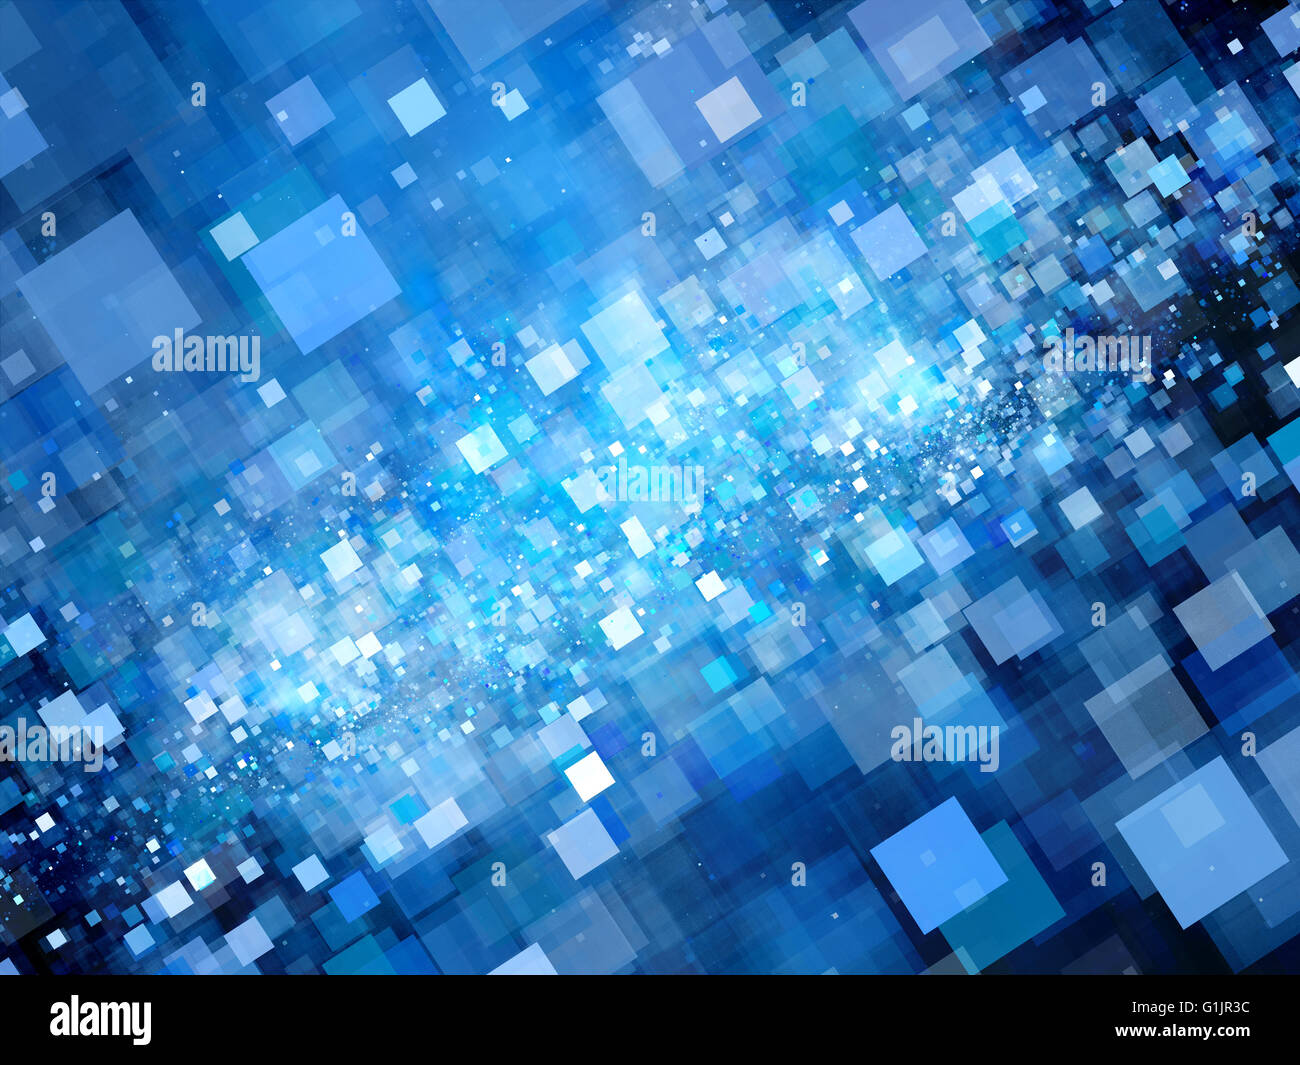 Big bang of future technologies, computer generated abstract background Stock Photo